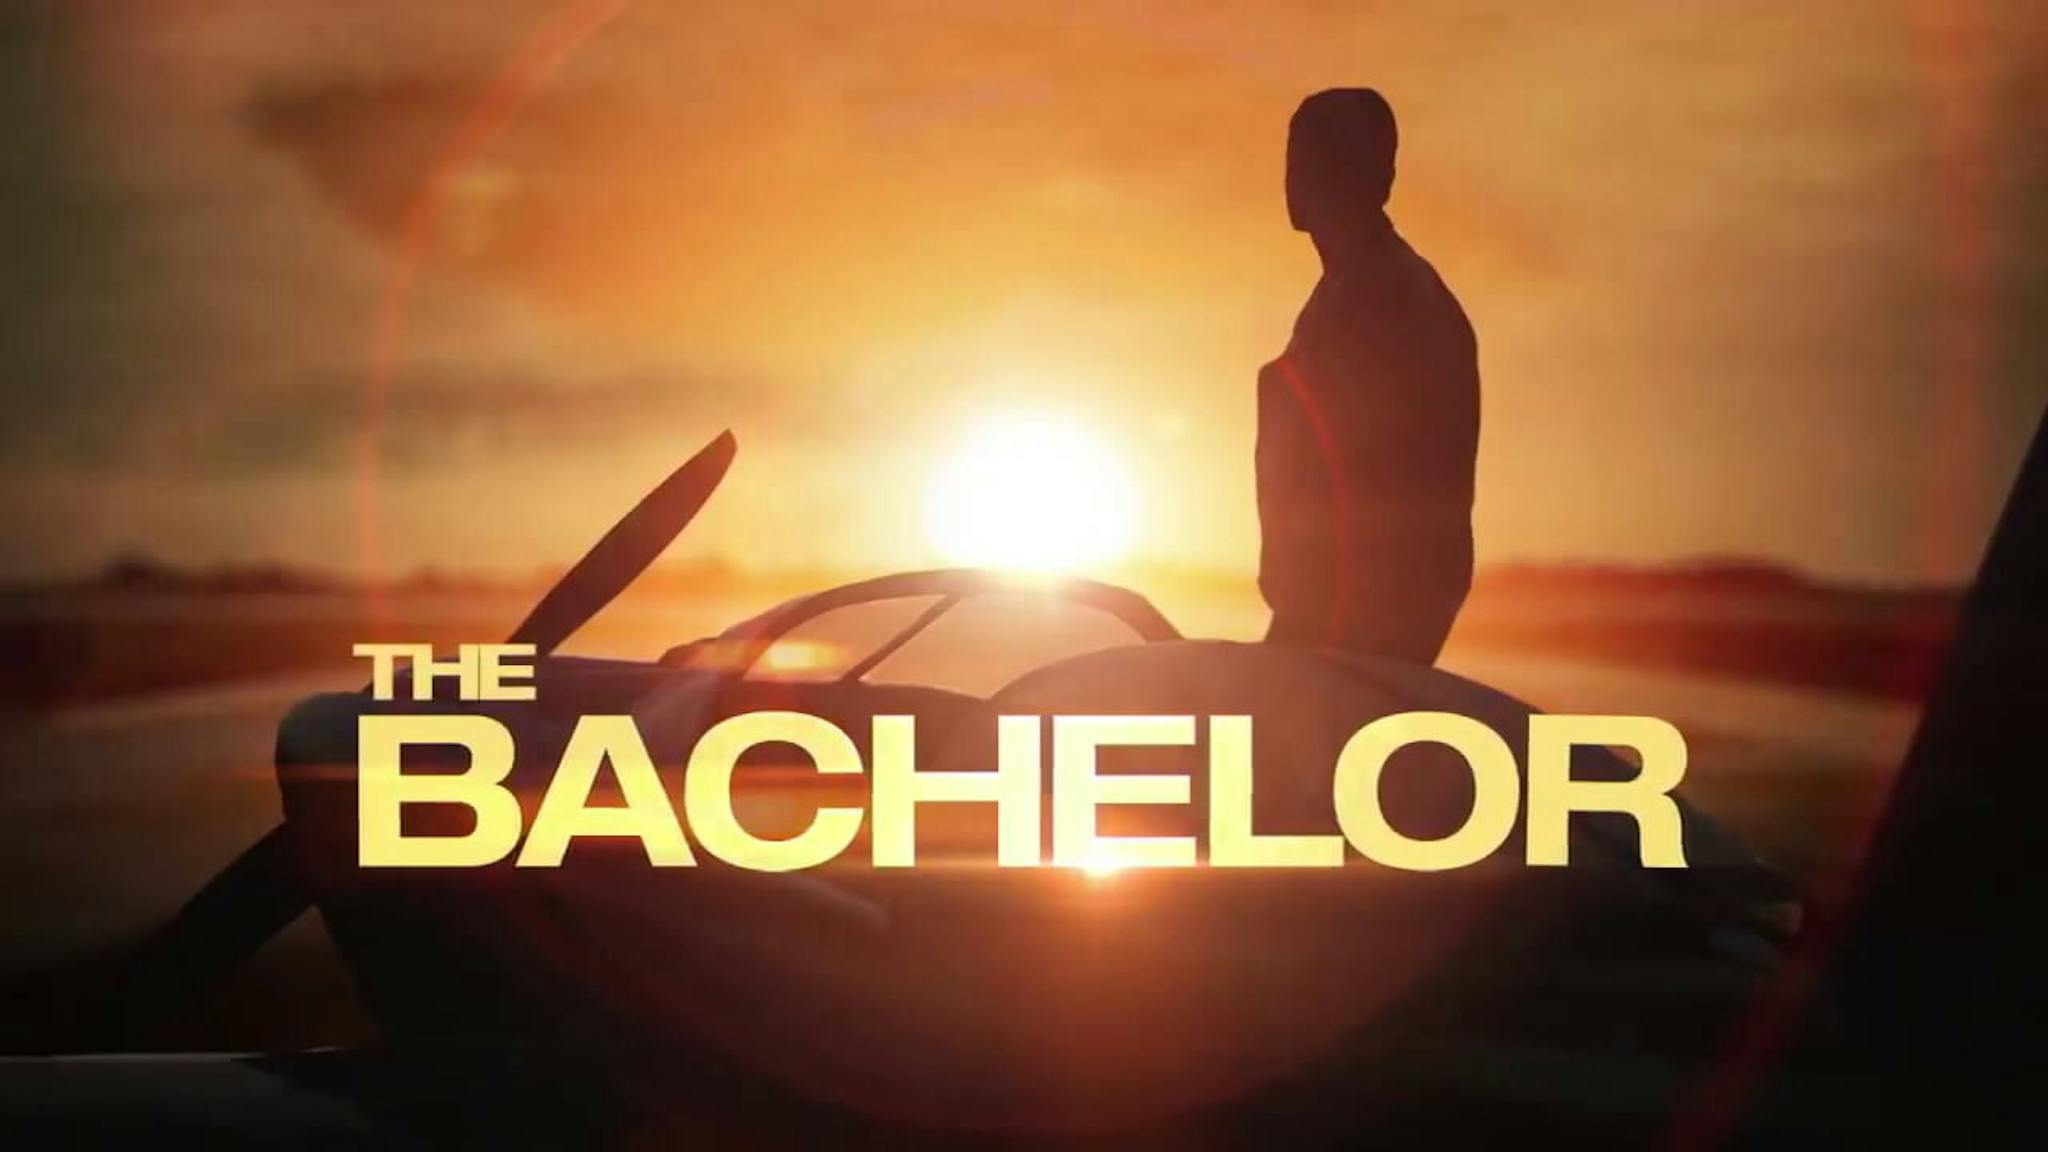 Watch 'The Bachelor' Finale How to Stream Online